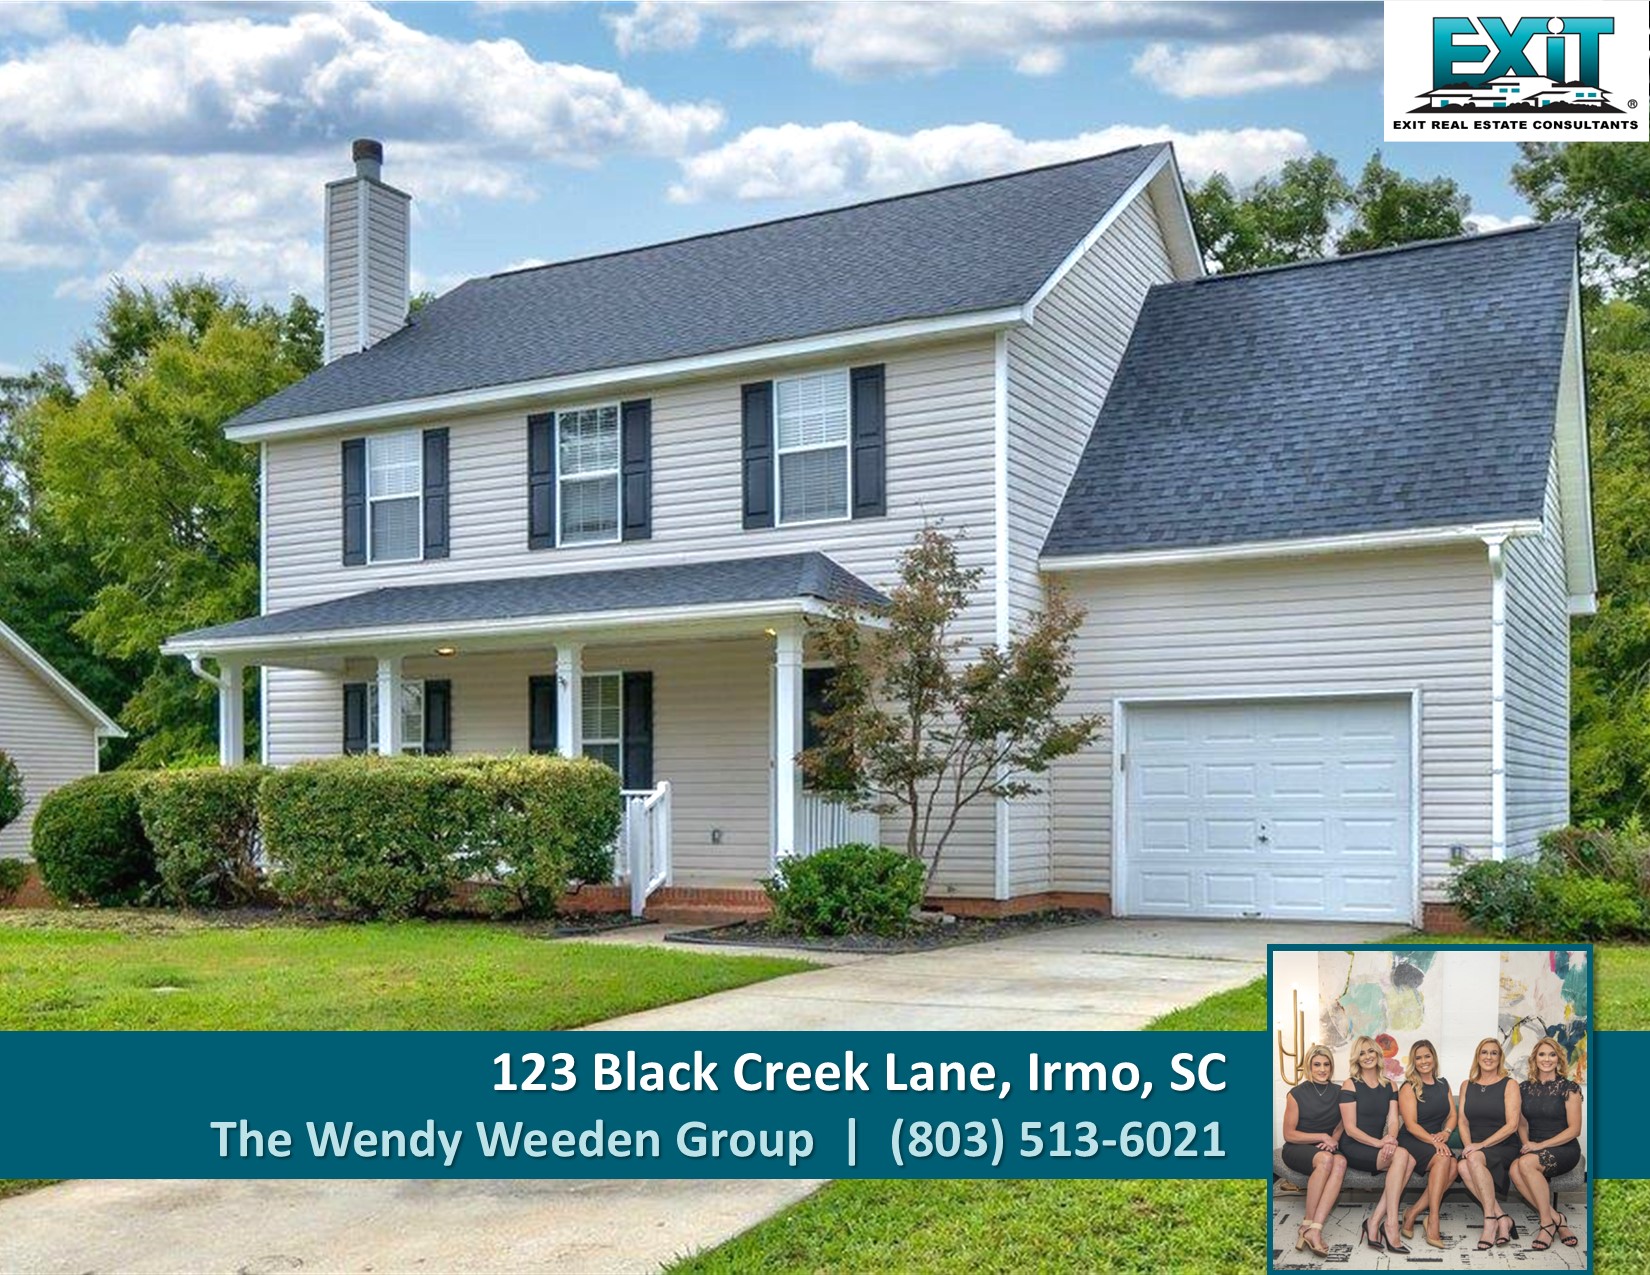 Just listed in St. Johns Place - Irmo